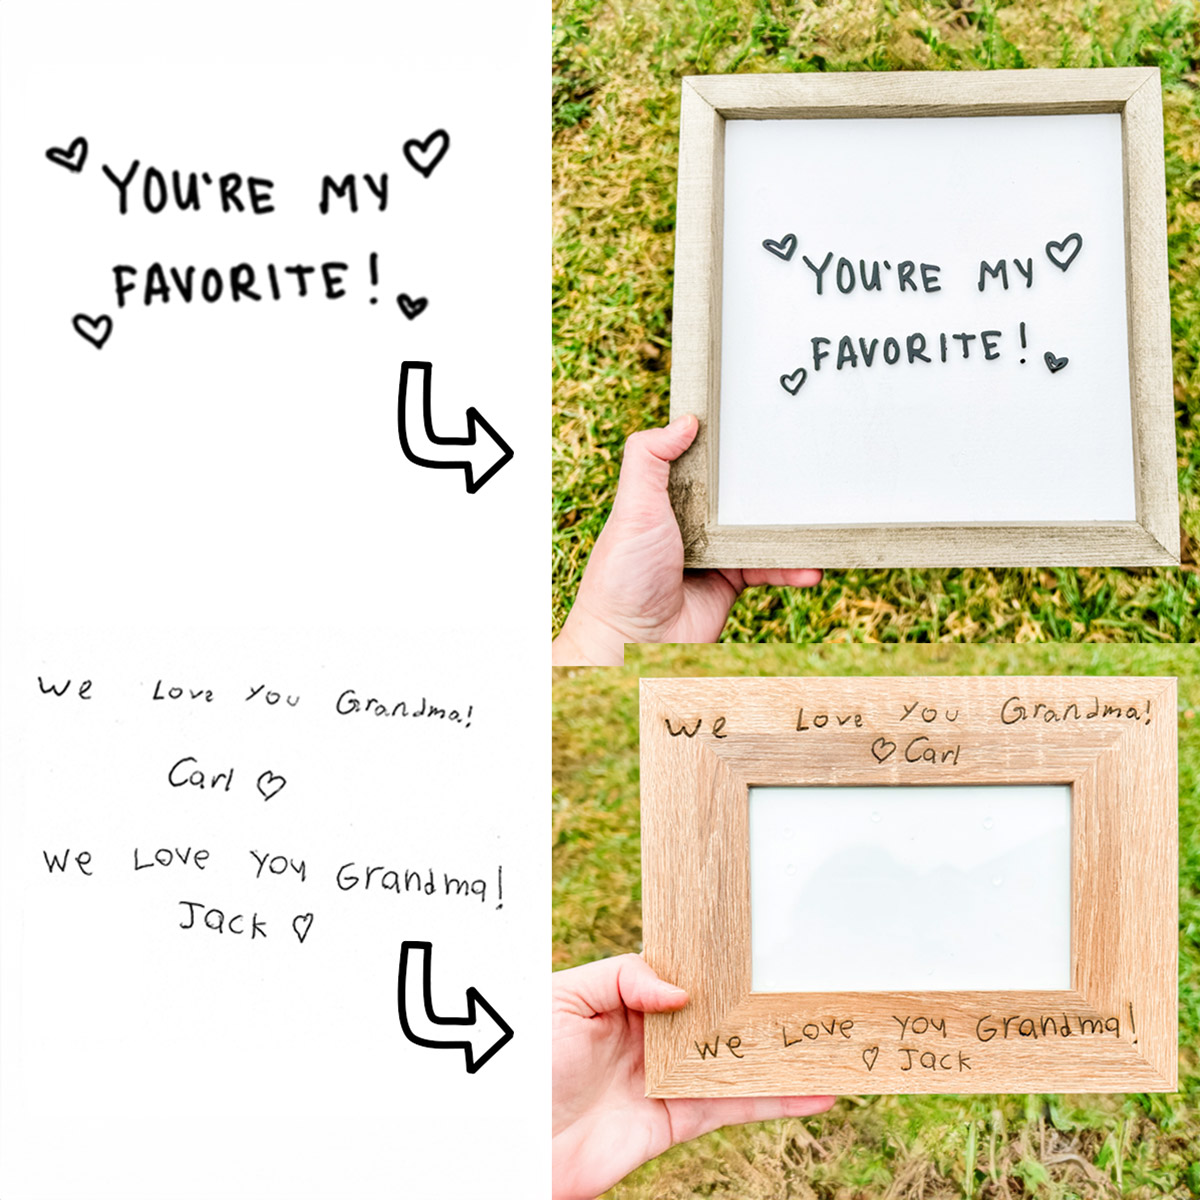 This image is showing a before picture of handwriting and the after picture of 2 laser gifts made with the SVG created of the handwriting shown. The top image says You're my favorite with some hearts on a wooden frame with the words cut out of black acrylic. At the bottom, it is a picture frame with the words engraved: we love you Grandma! Carl (heart). We love you Grandma! Jack (heart).